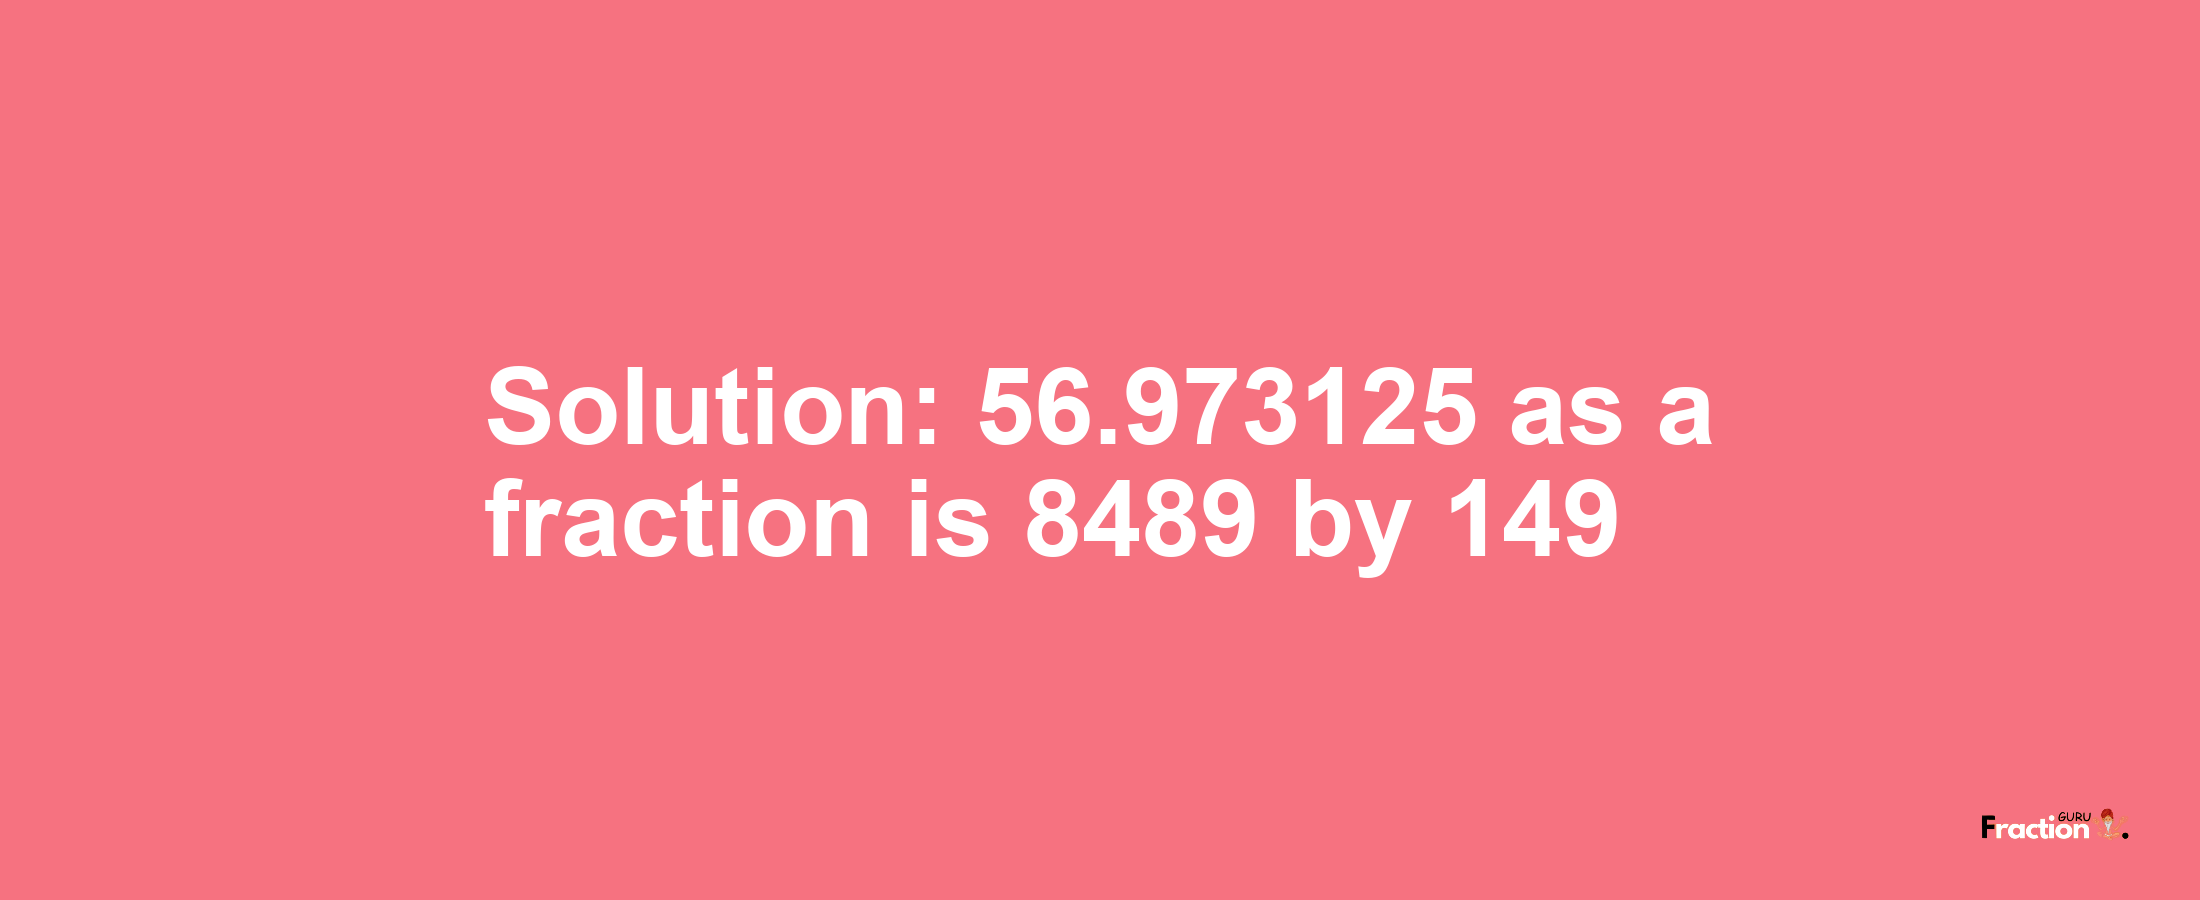 Solution:56.973125 as a fraction is 8489/149